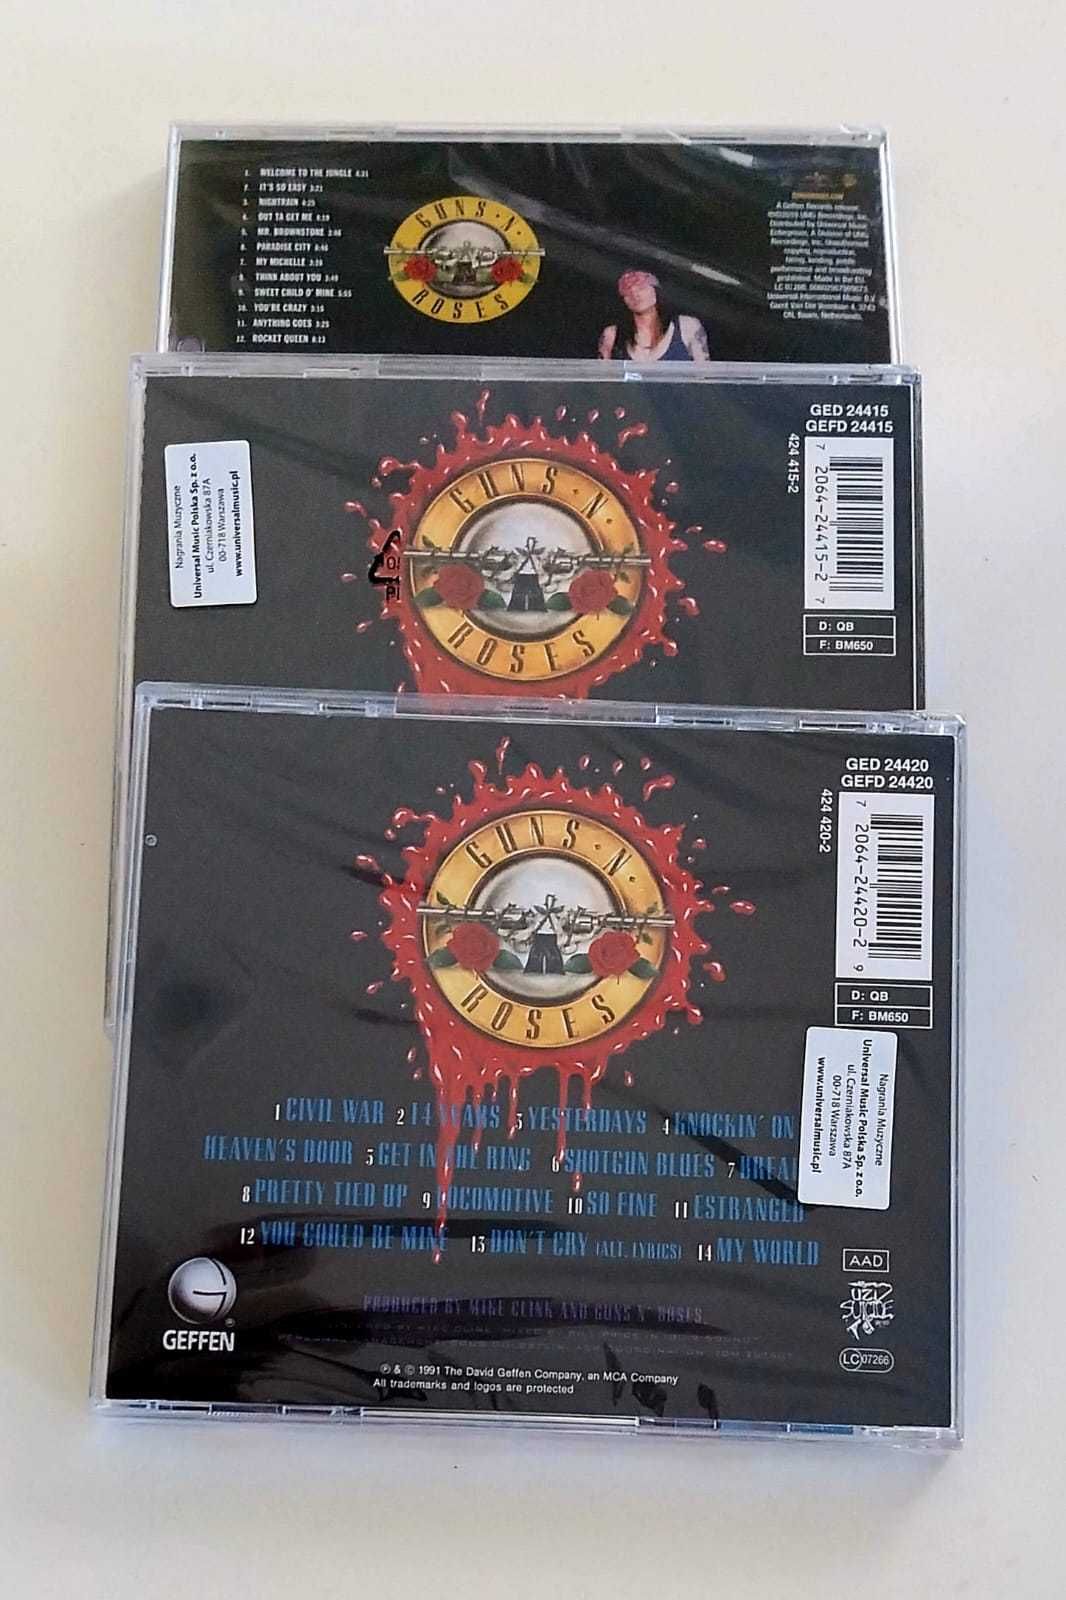 Guns N Roses - Appetite For Destruction Use Your Illusion I and II 3CD